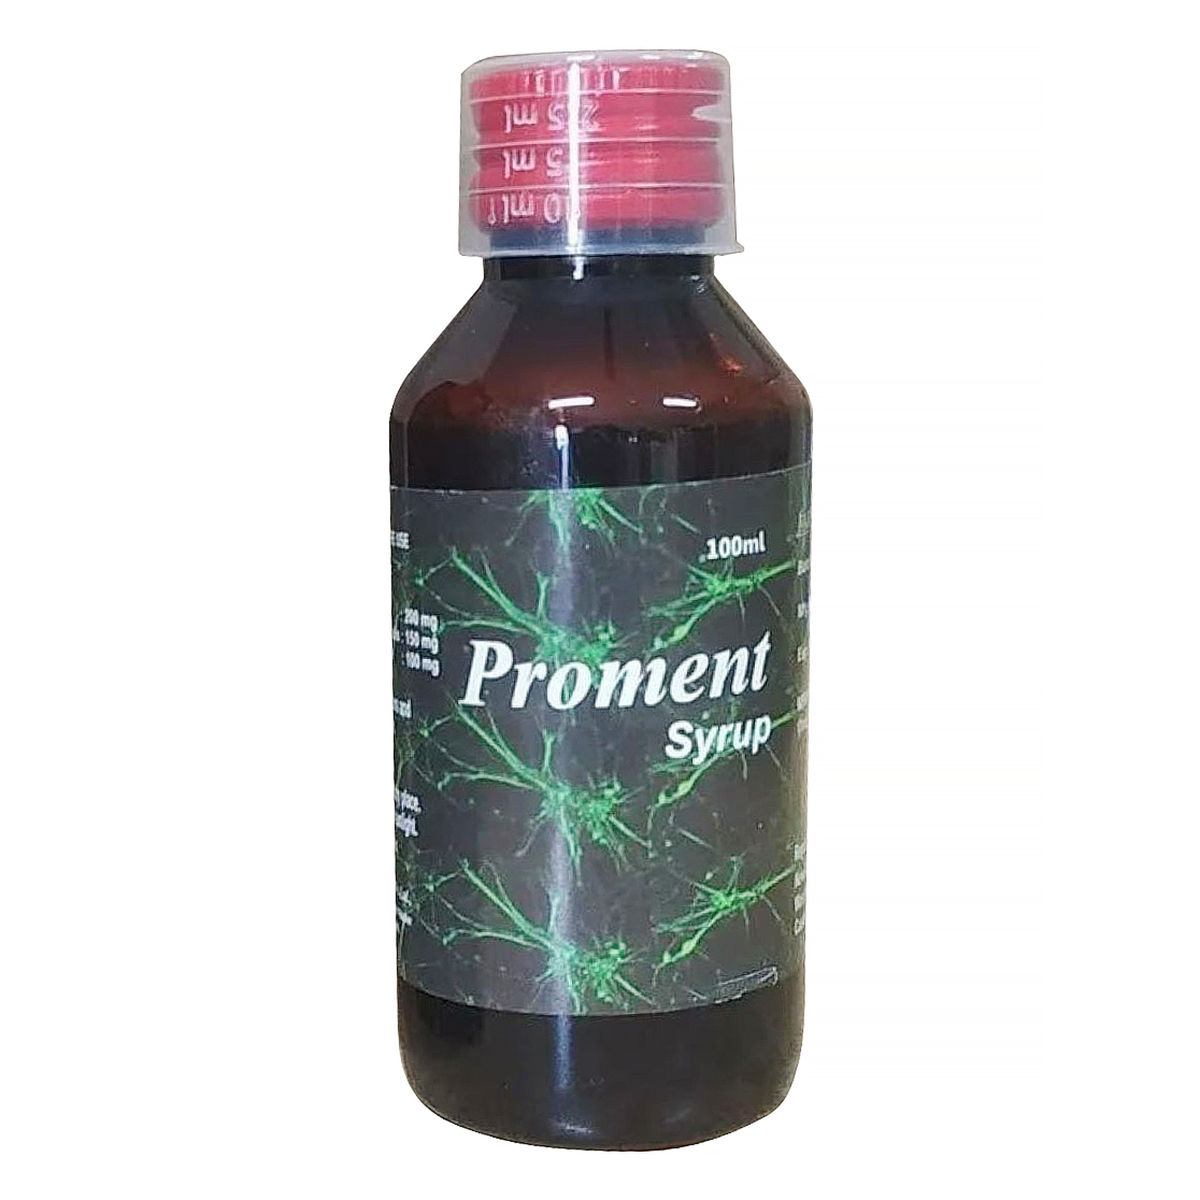 Buy Proment Syrup, 100 ml Online